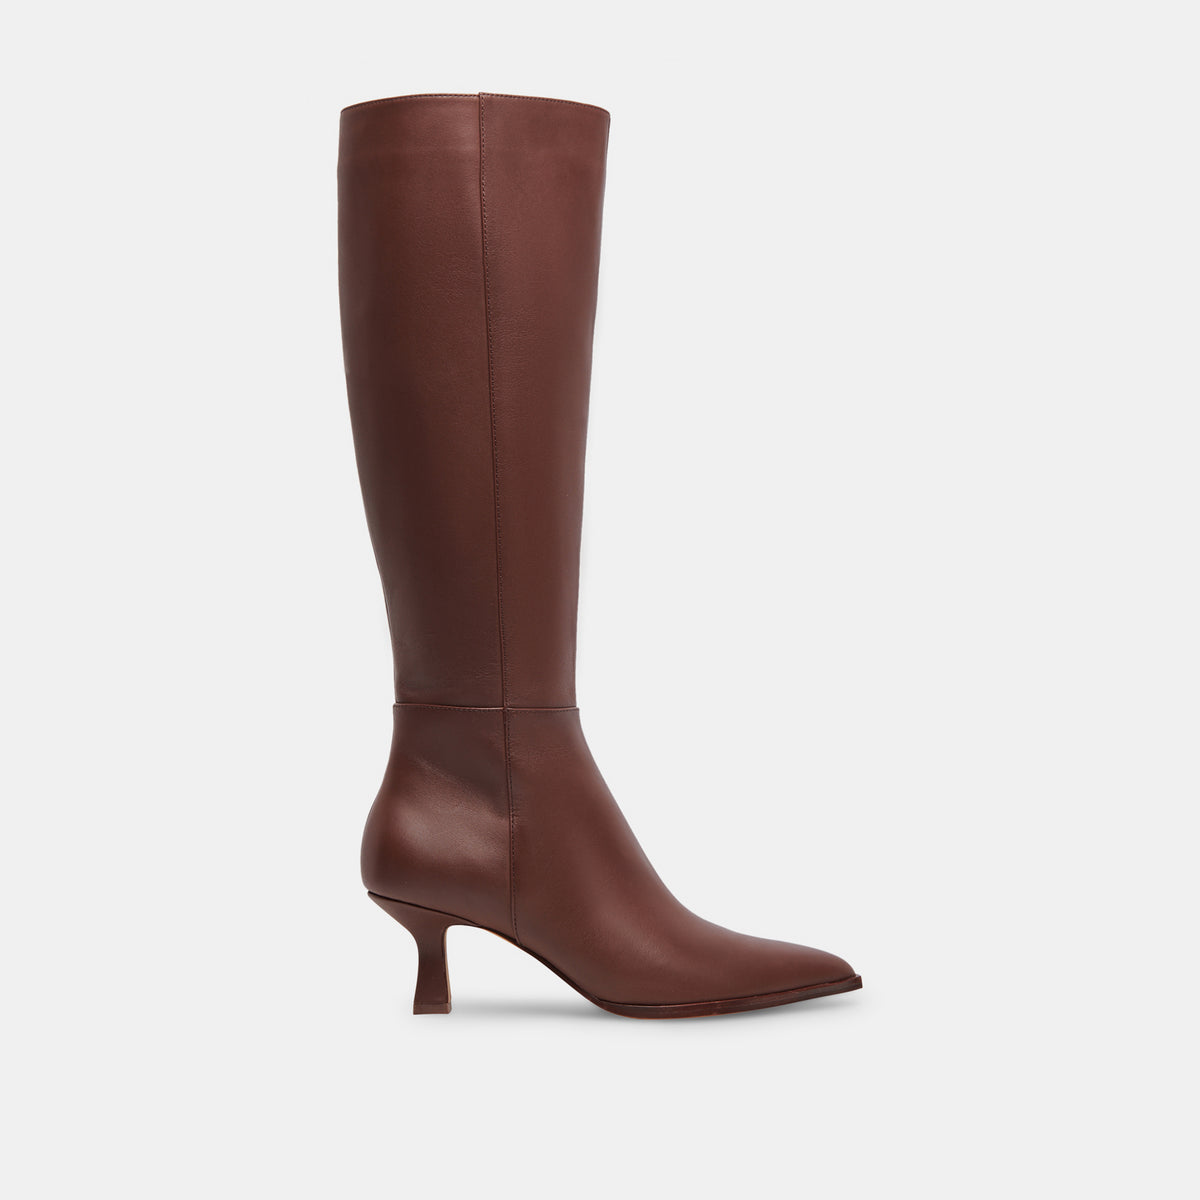 AUGGIE BOOTS CHOCOLATE LEATHER